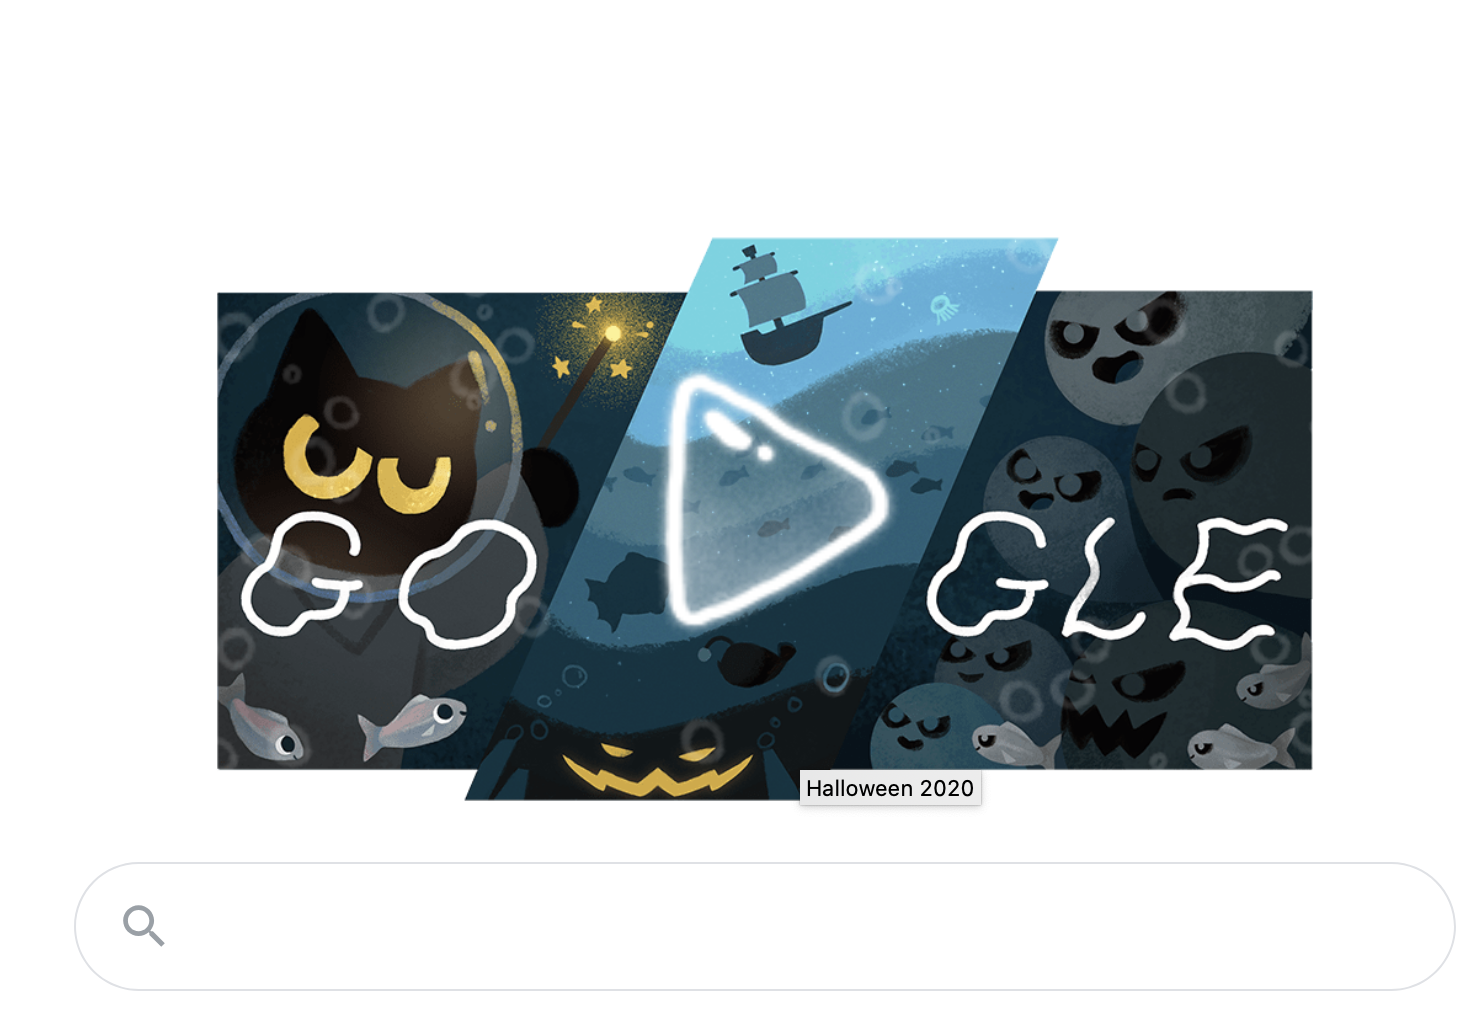 The Adorable Cat From the Halloween Google Doodle Game Has